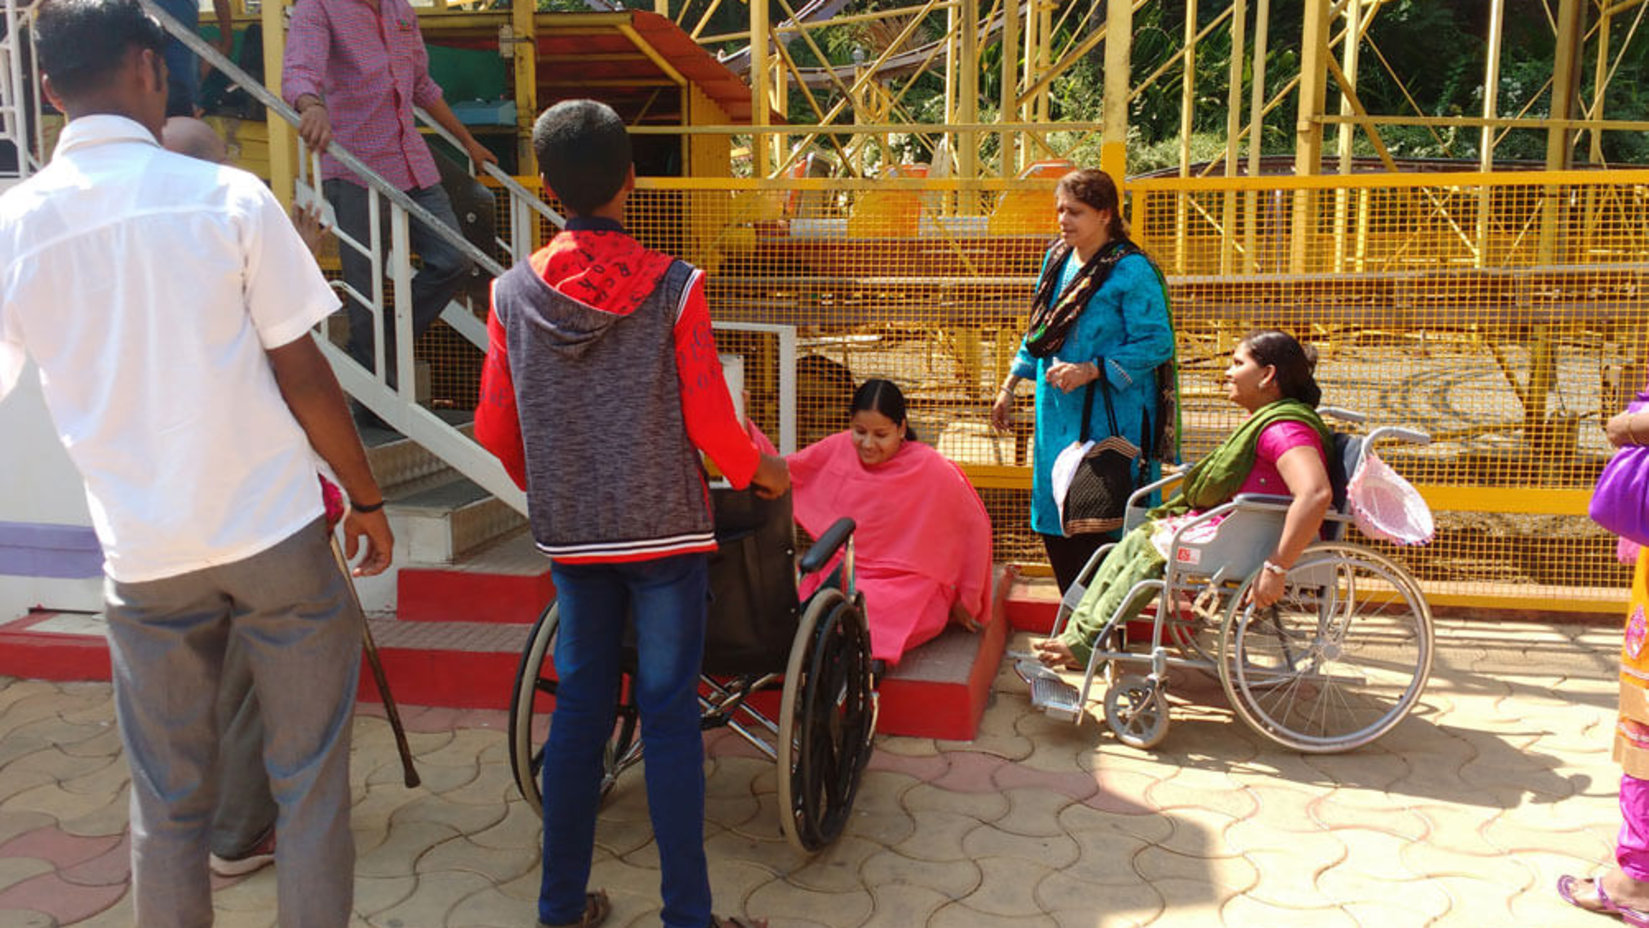 a group of people in wheelchairs during daytime